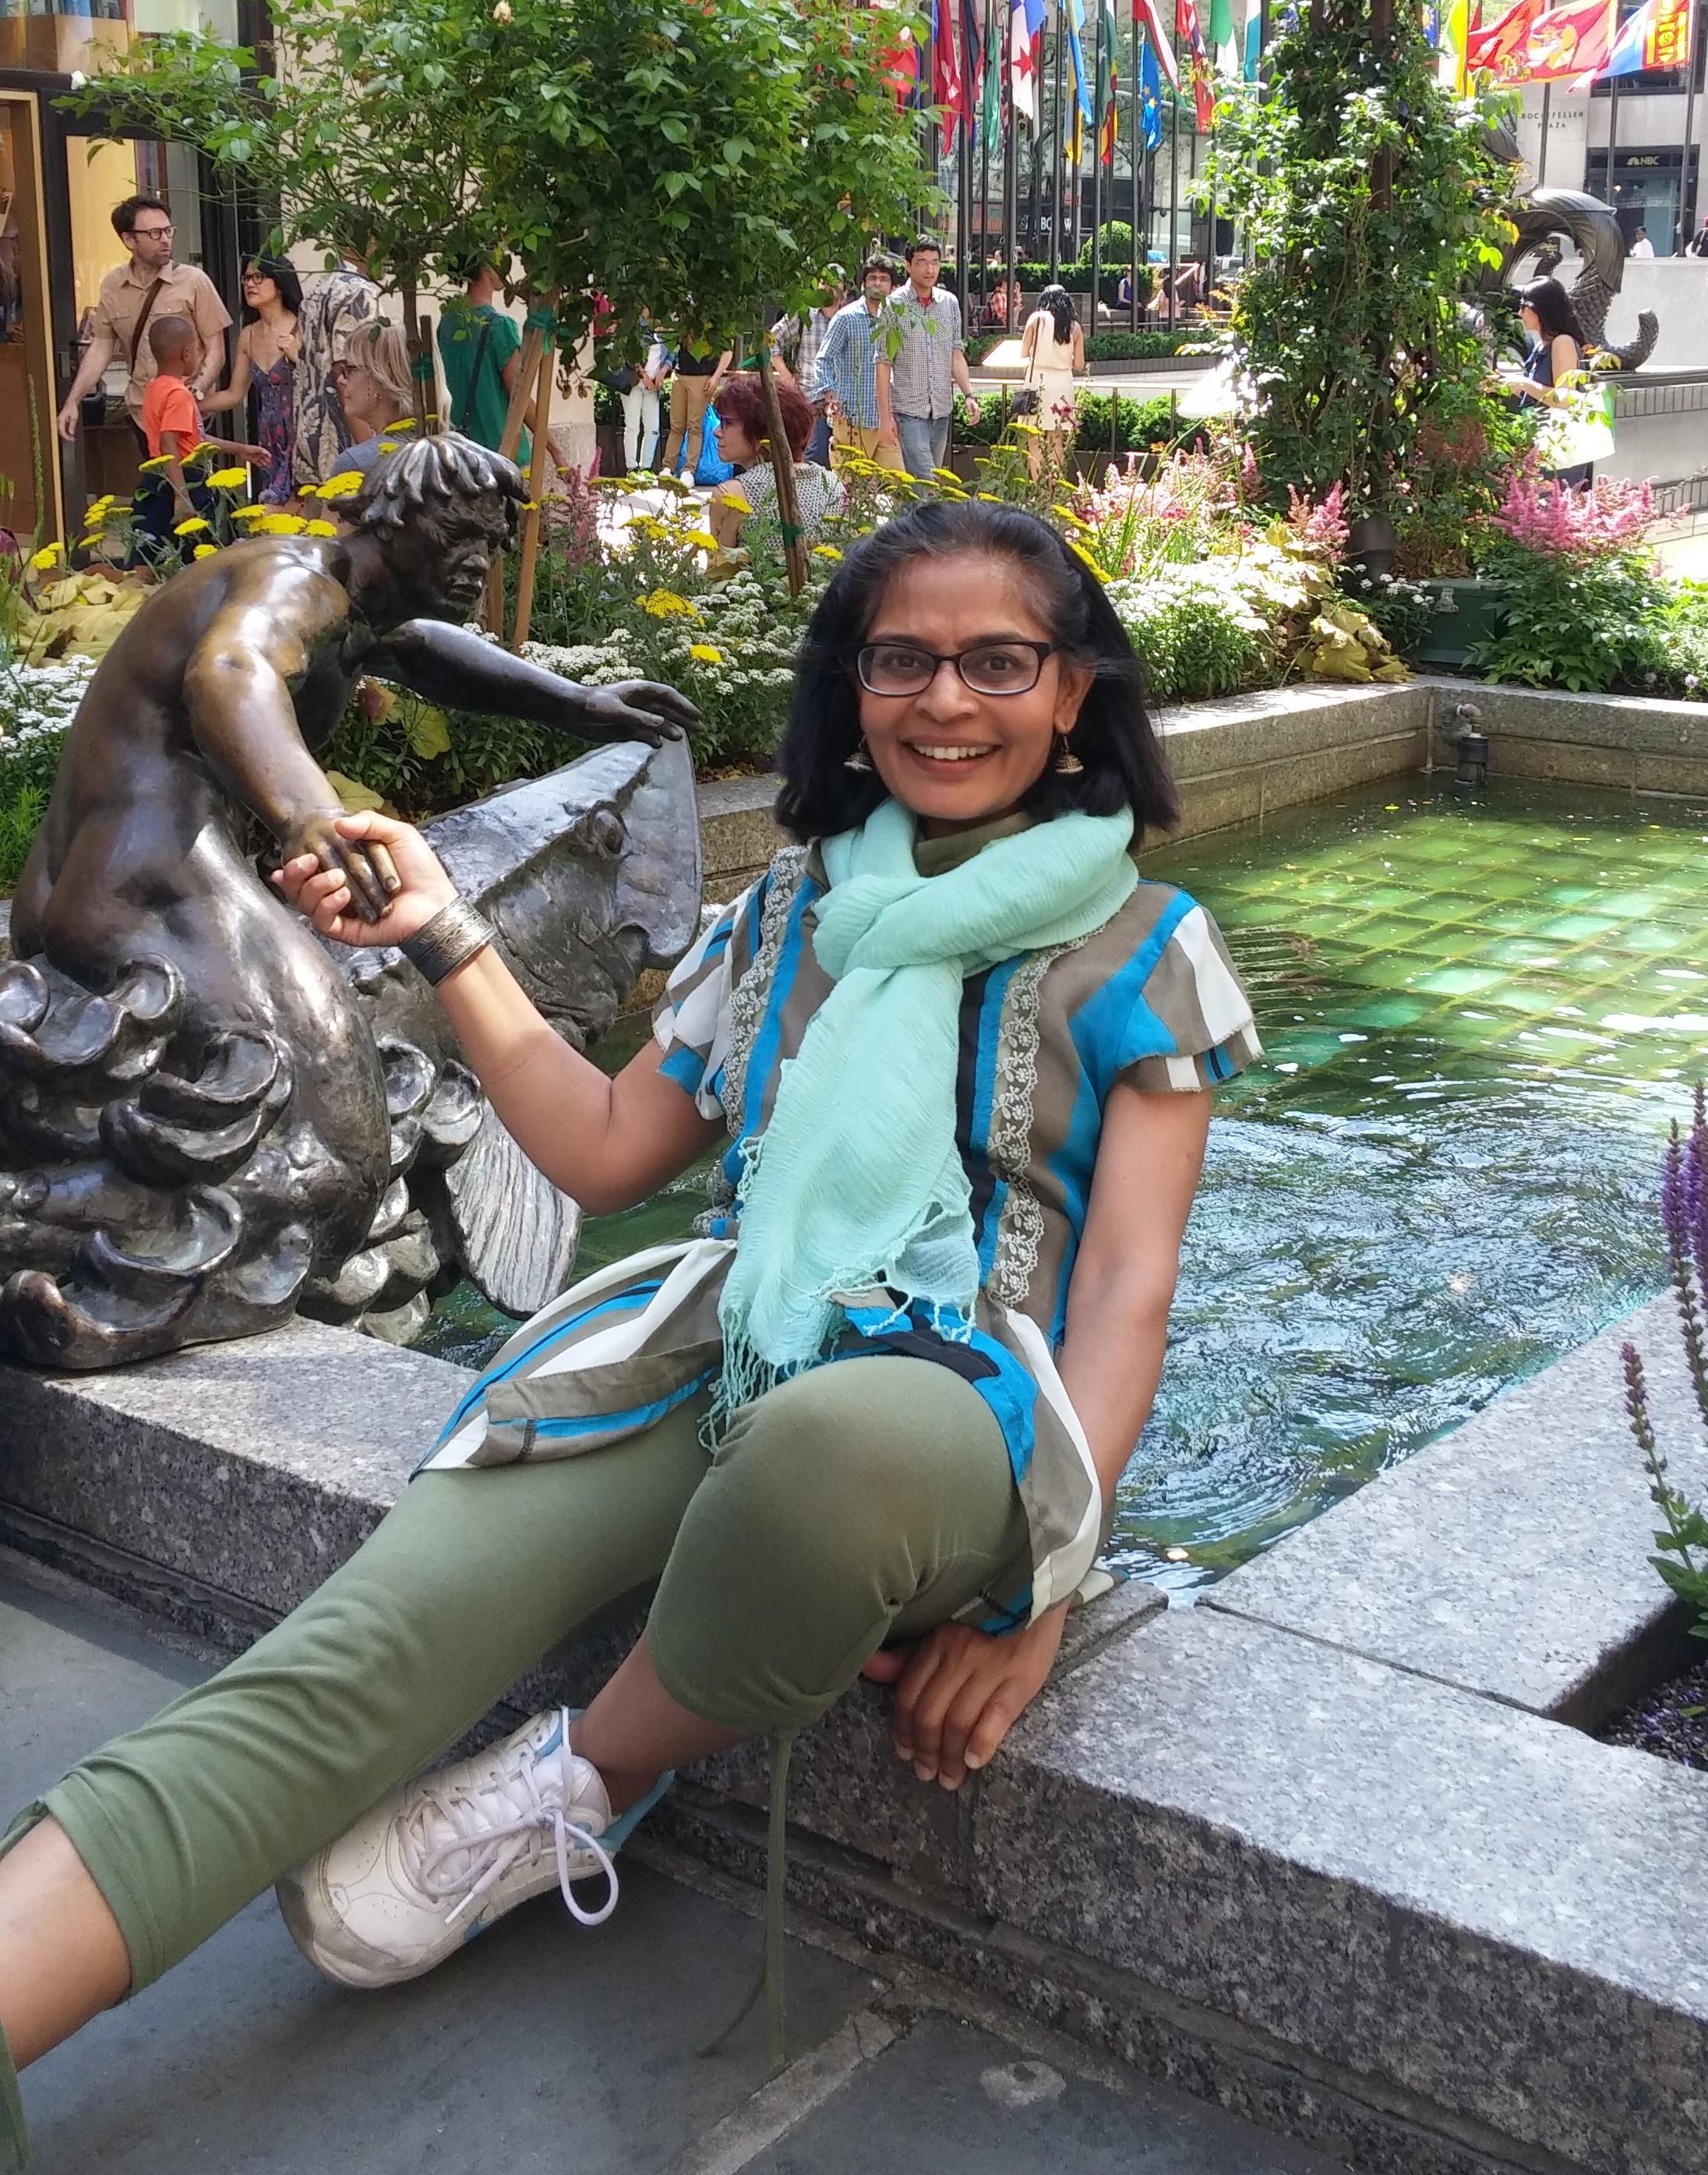 A dark complexed Indian woman with black hair shoulder length, brown eyes, smiling, wearing green pants, a light blue scarf, and a multi-patterned shirt, holding hands with a statue.